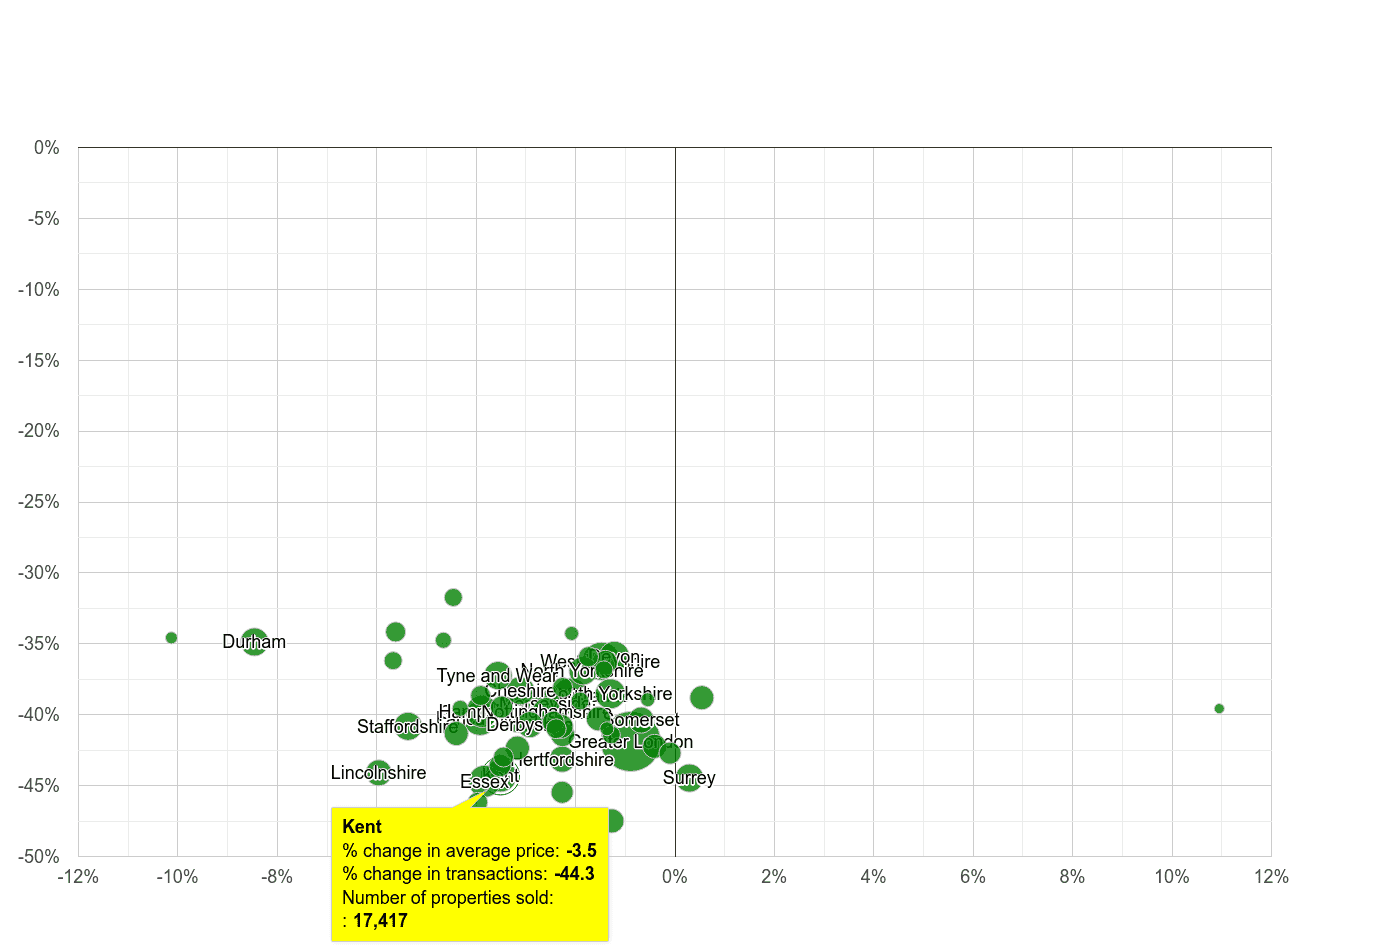 Kent property price and sales volume change relative to other counties